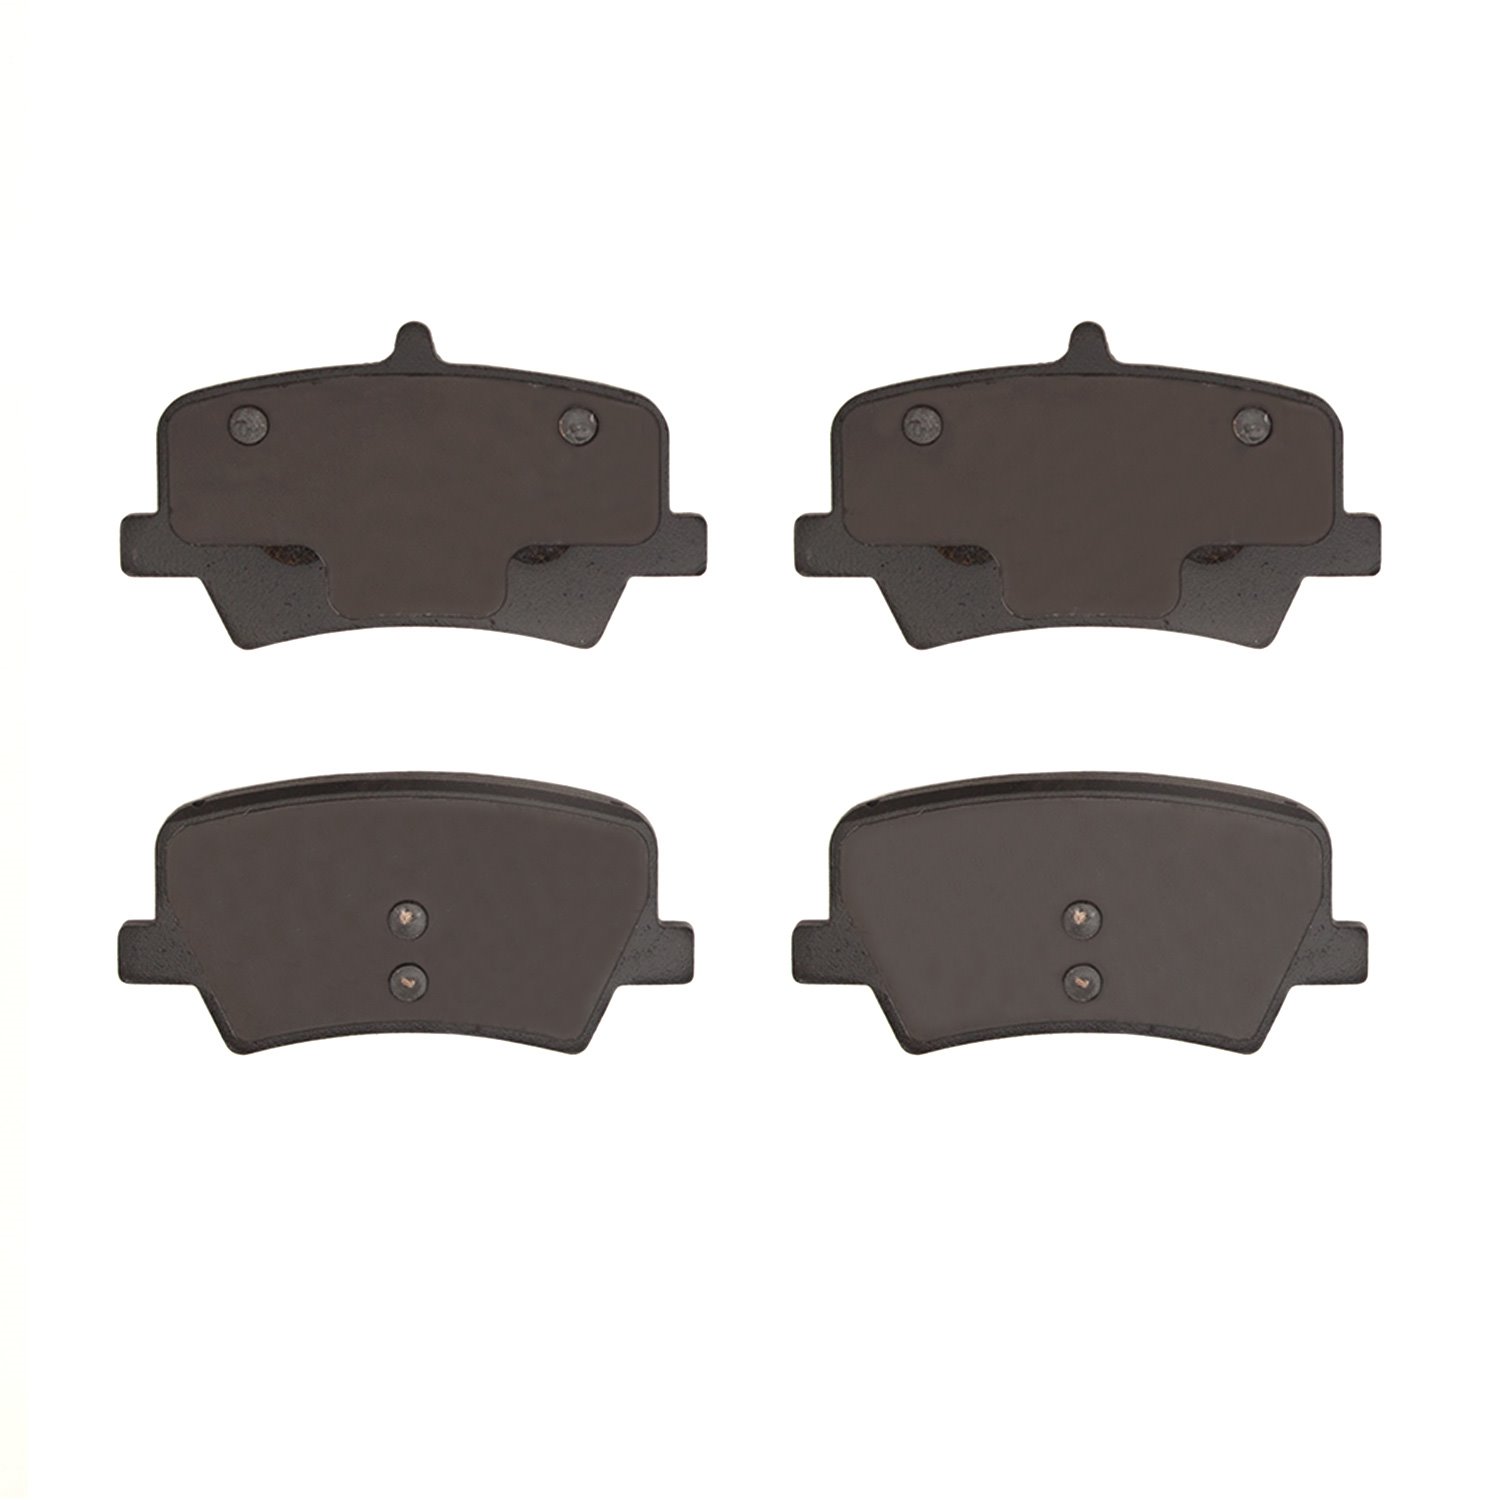 1551-2136-00 5000 Advanced Ceramic Brake Pads, Fits Select Volvo, Position: Rear